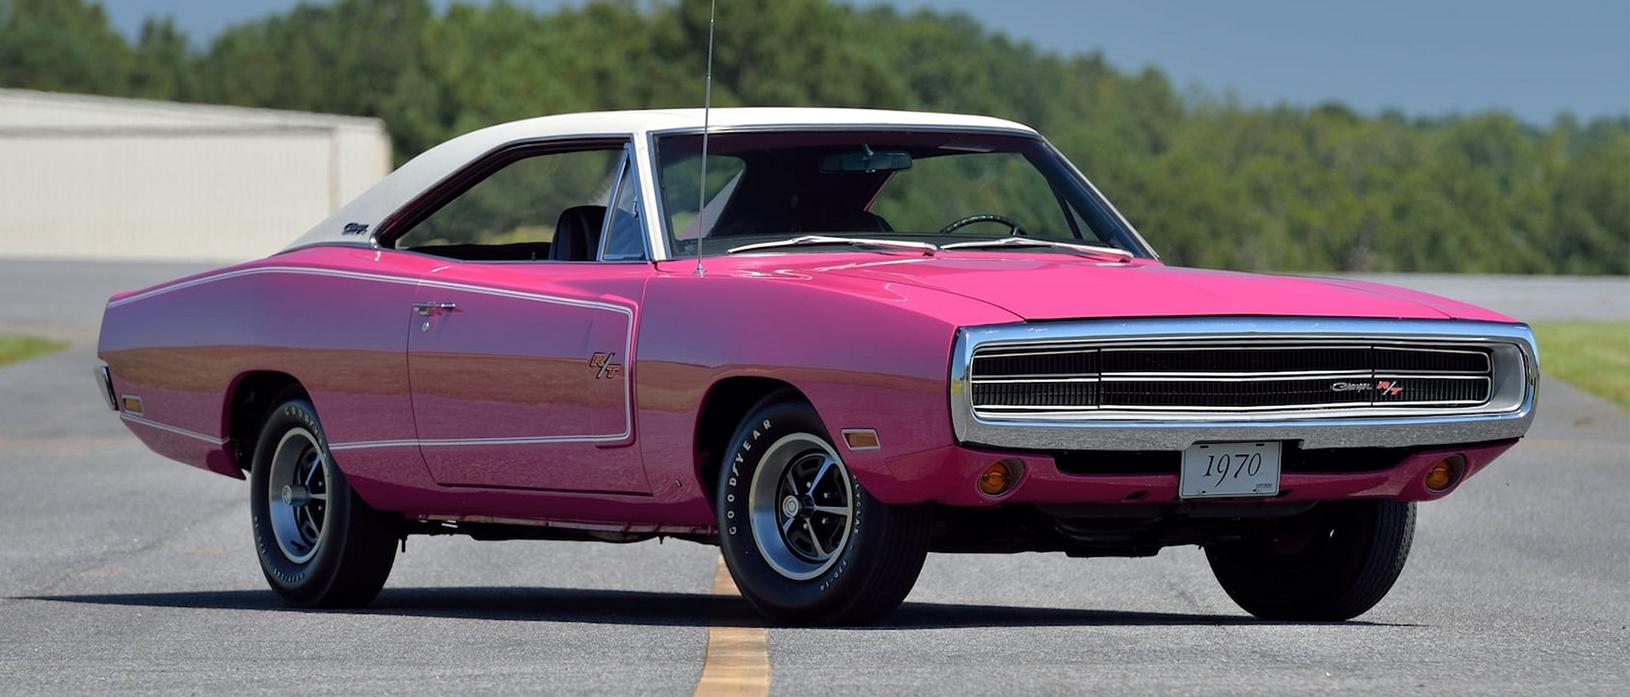 1970 dodge charger R/T